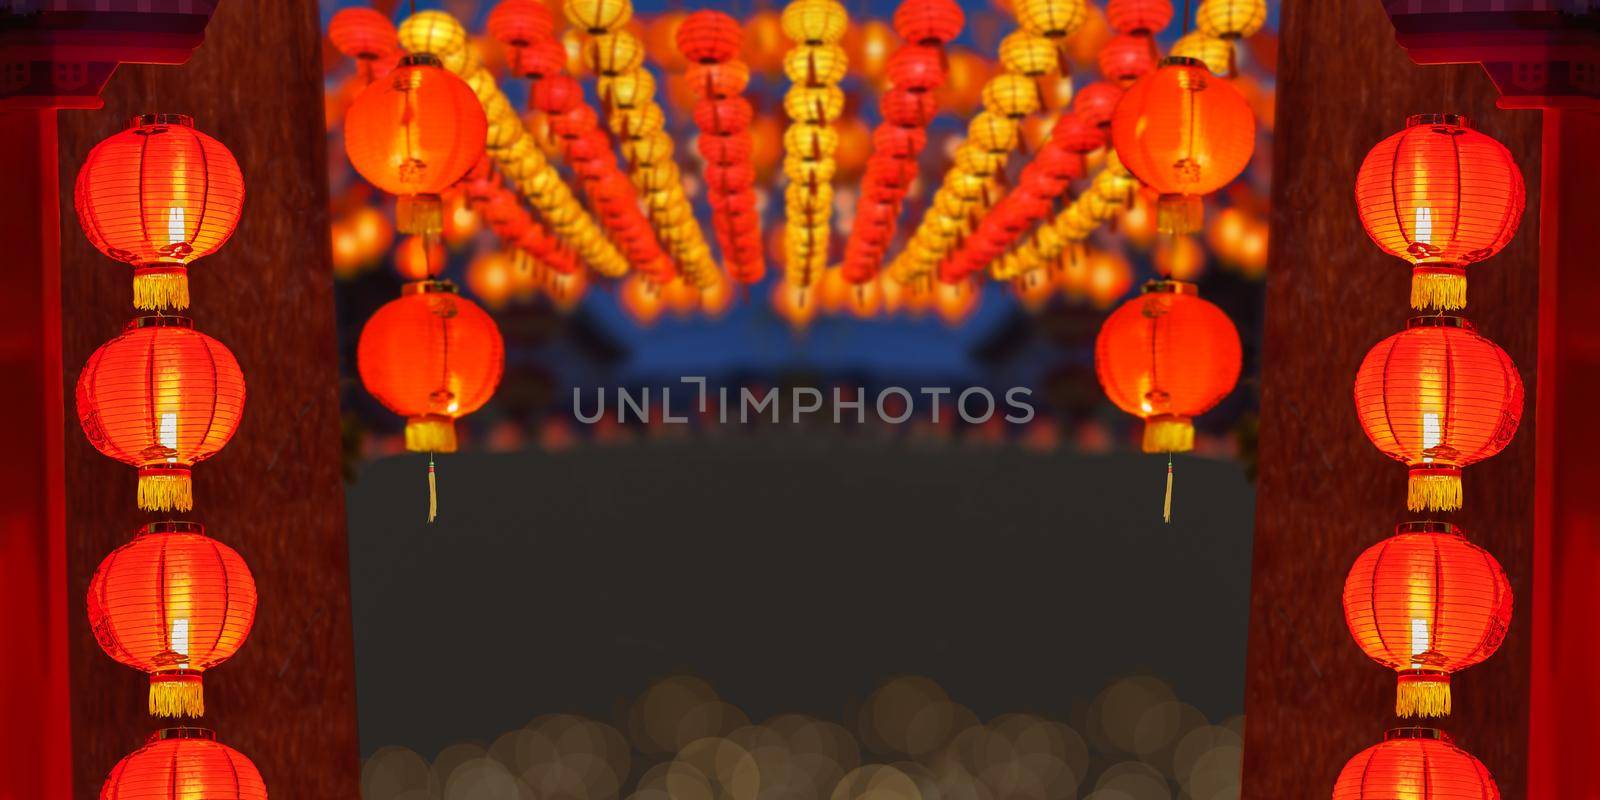 Chinese new year lanterns in china town area. by toa55